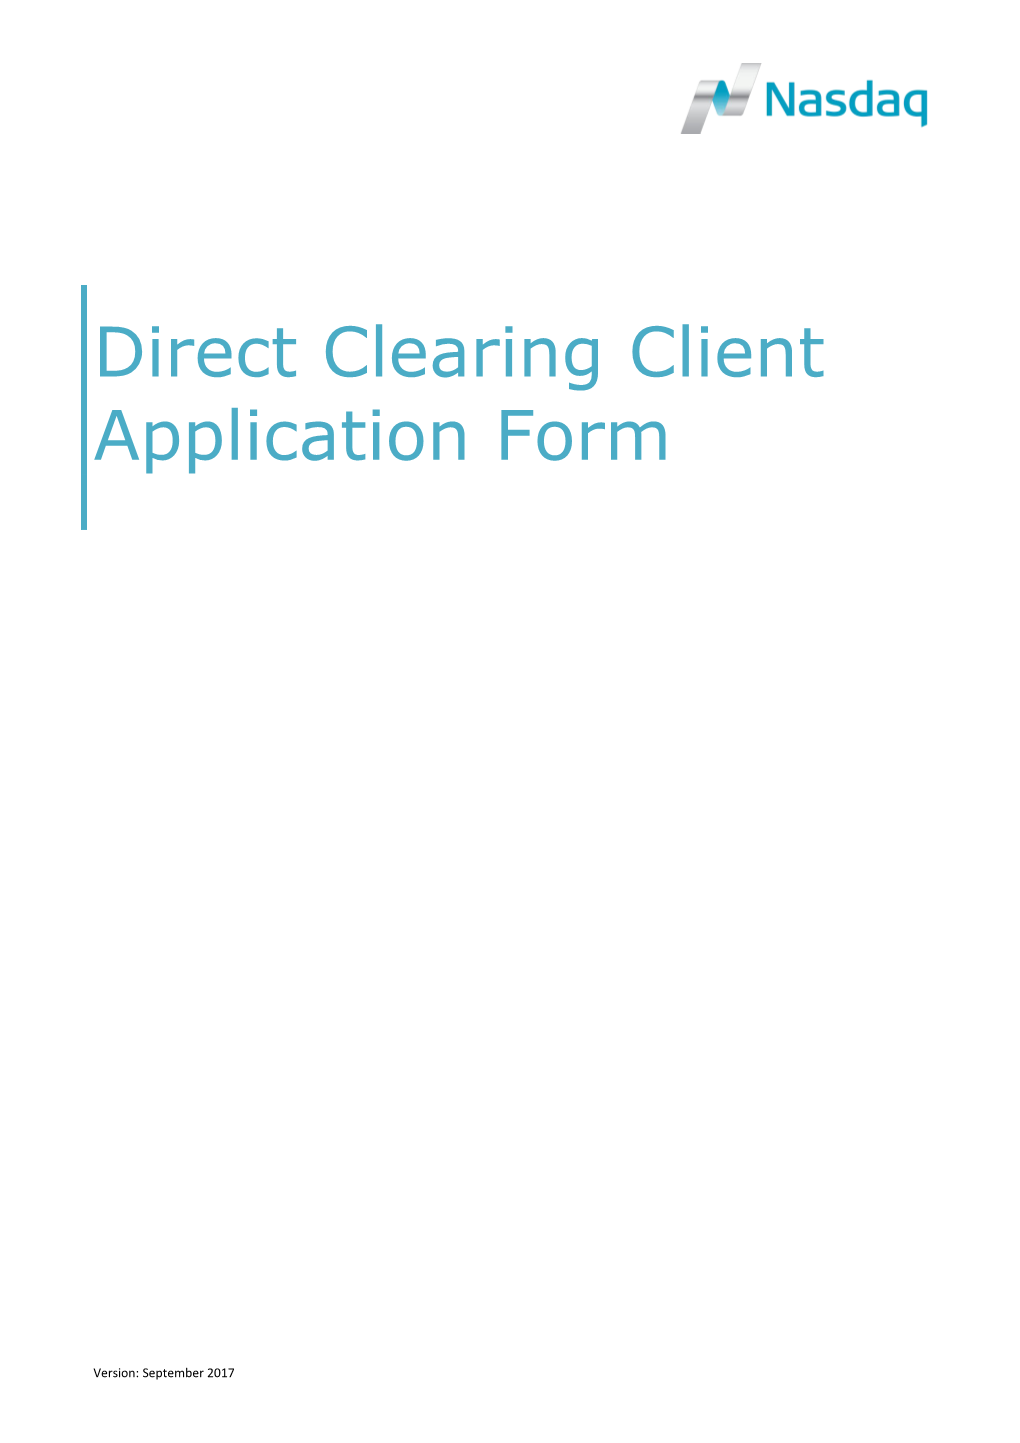 Nasdaqdirect Clearing Client - Application FORM Derivatives/Commodities